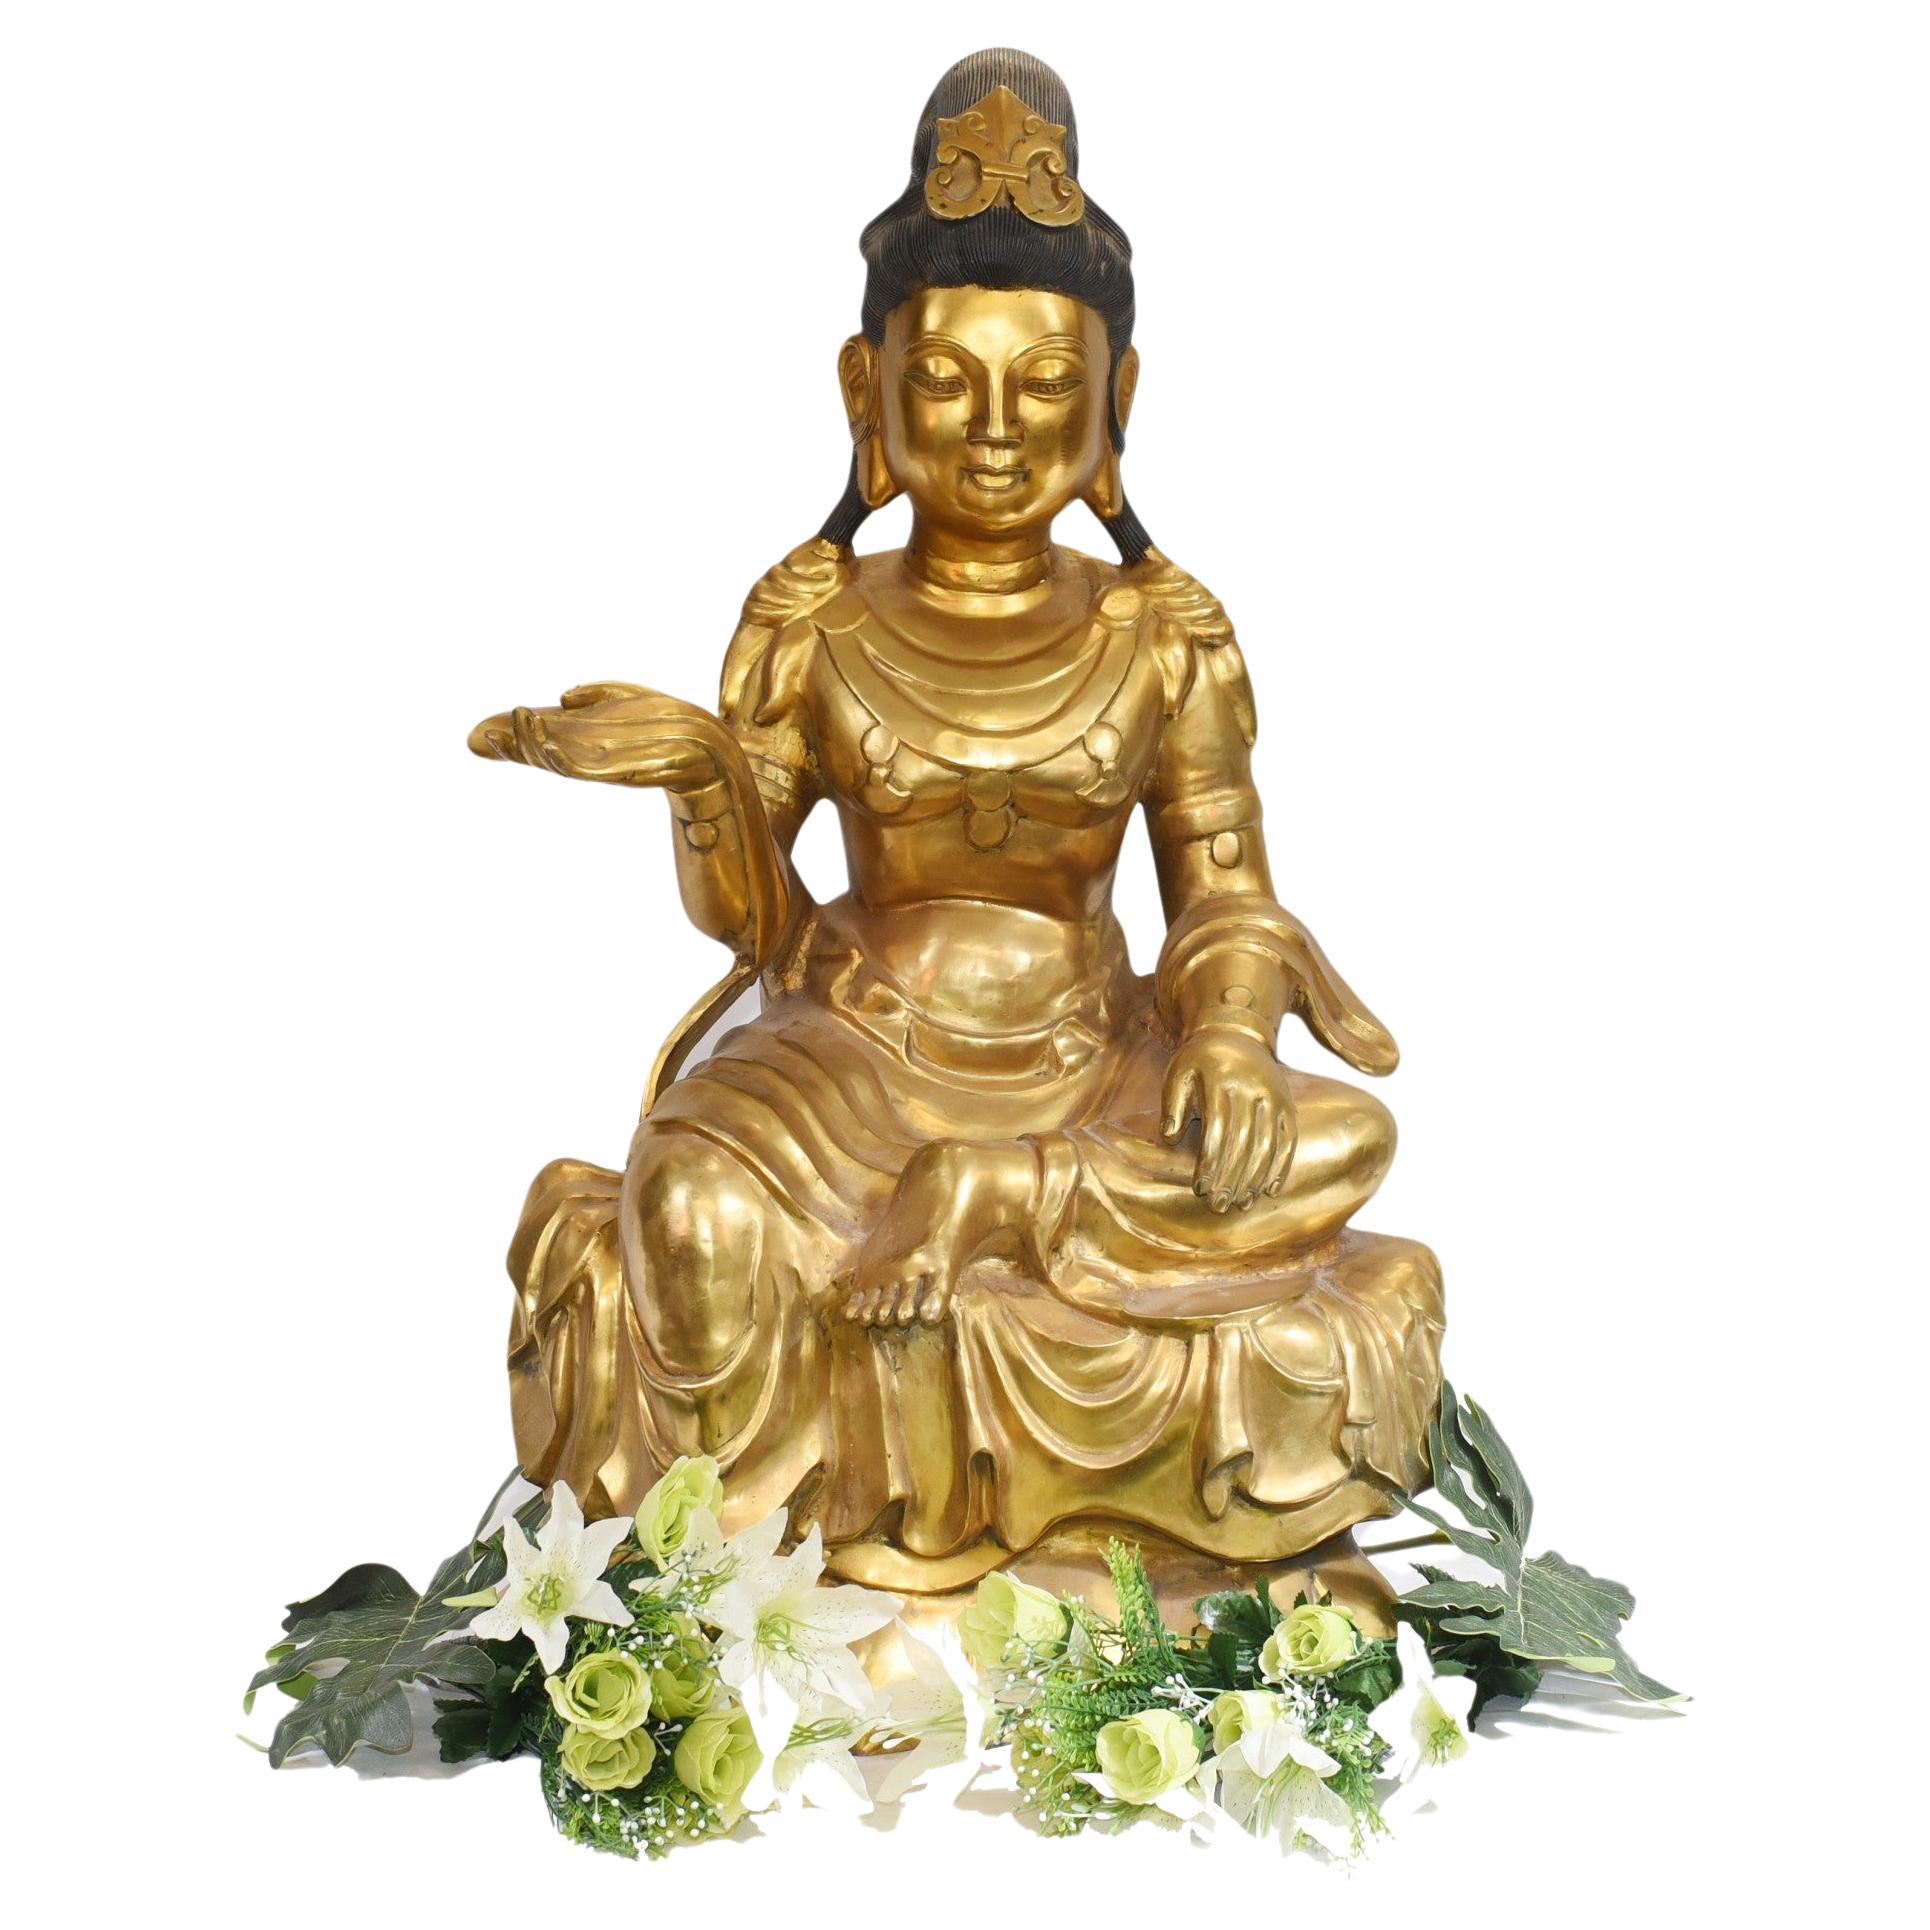 Seated Golden Buddha Statue Nepalese Meditation Bronze Sculpture For Sale